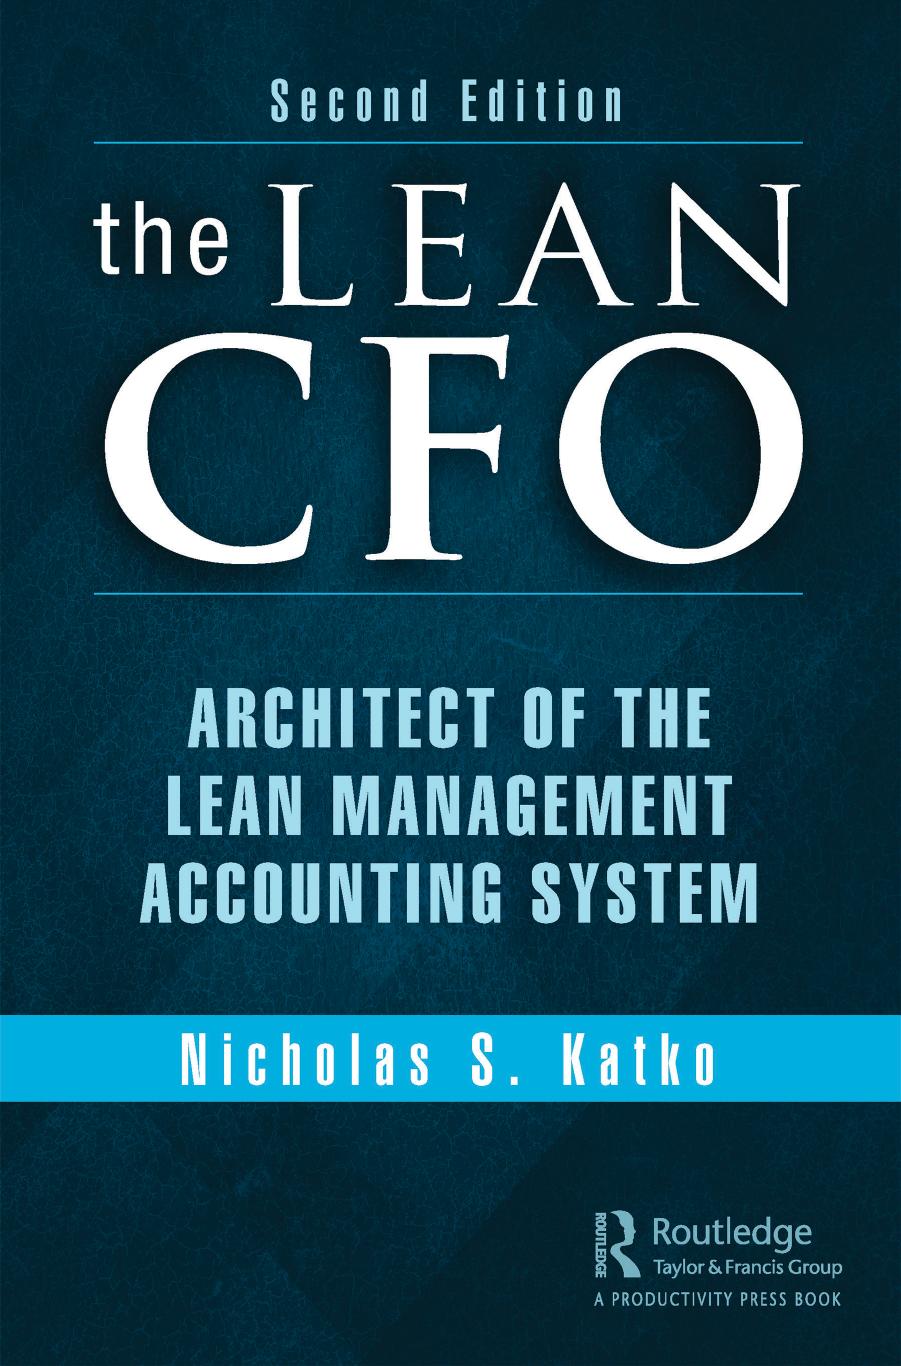 The Lean CFO; Architect of the Lean Management Accounting System by Nicholas S. Katko